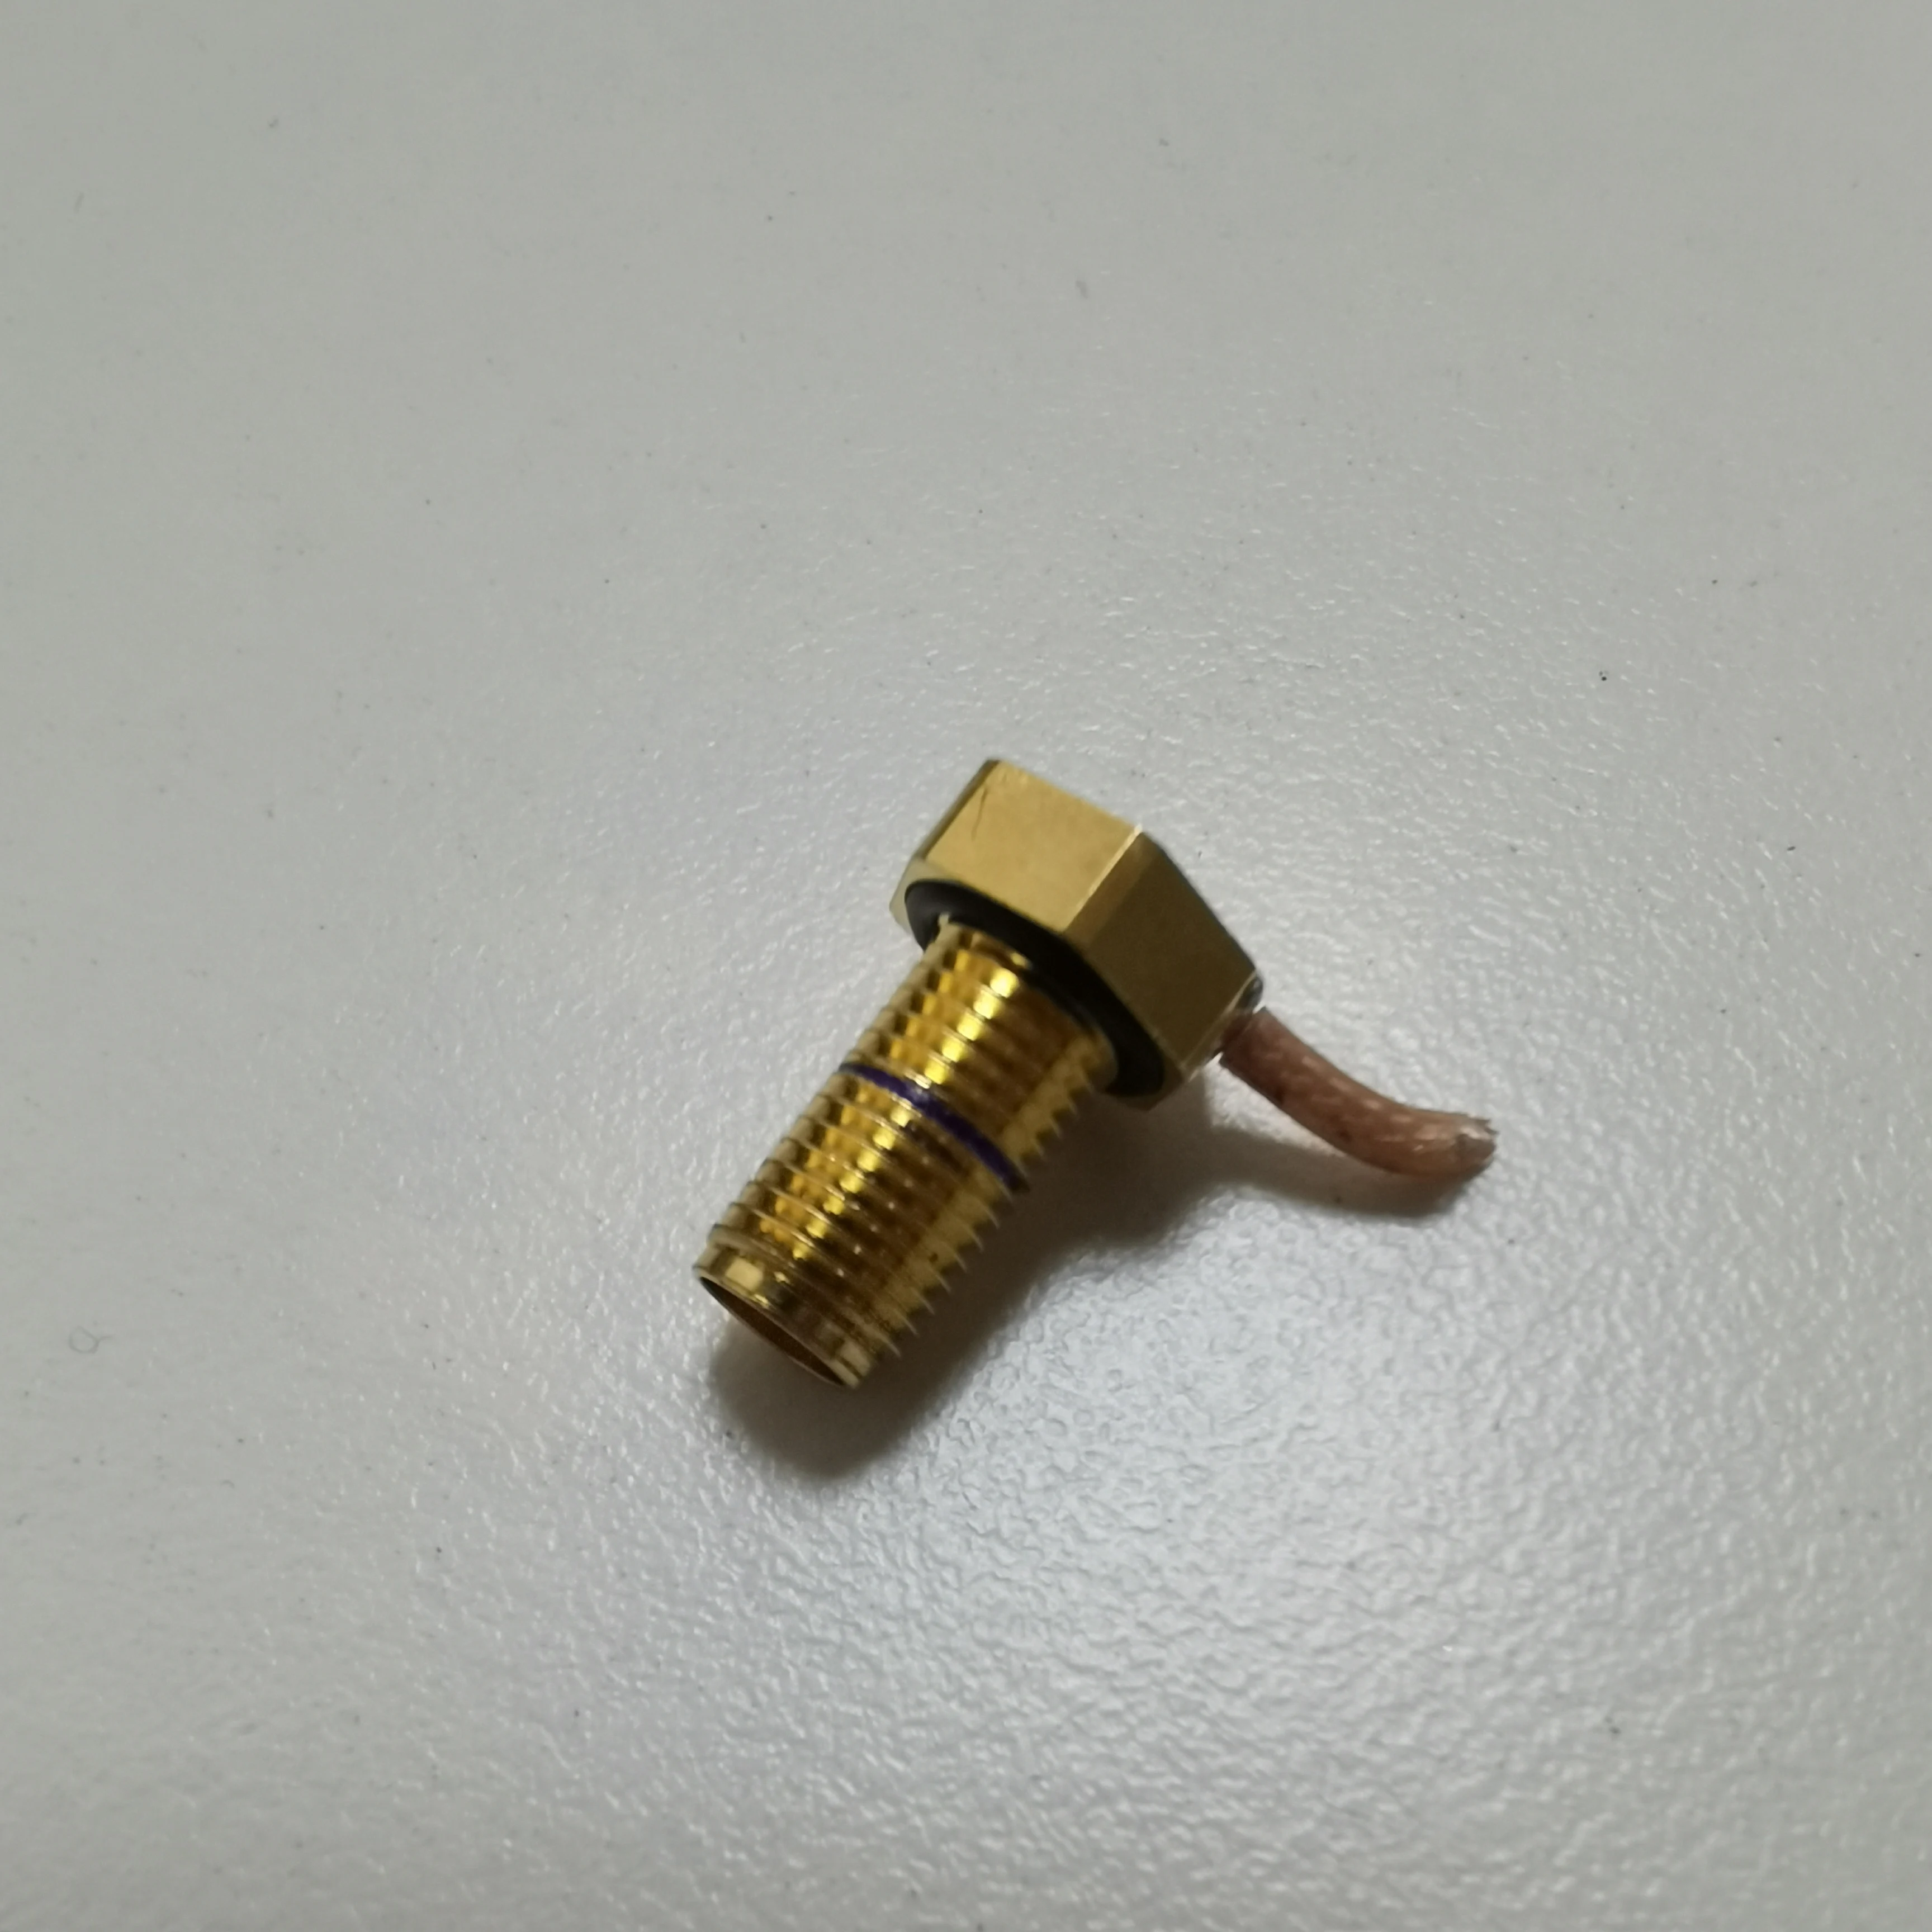 

Brass SMA Female Antenna Socket Accessories Replacement Parts For Garmin Alpha 100 50